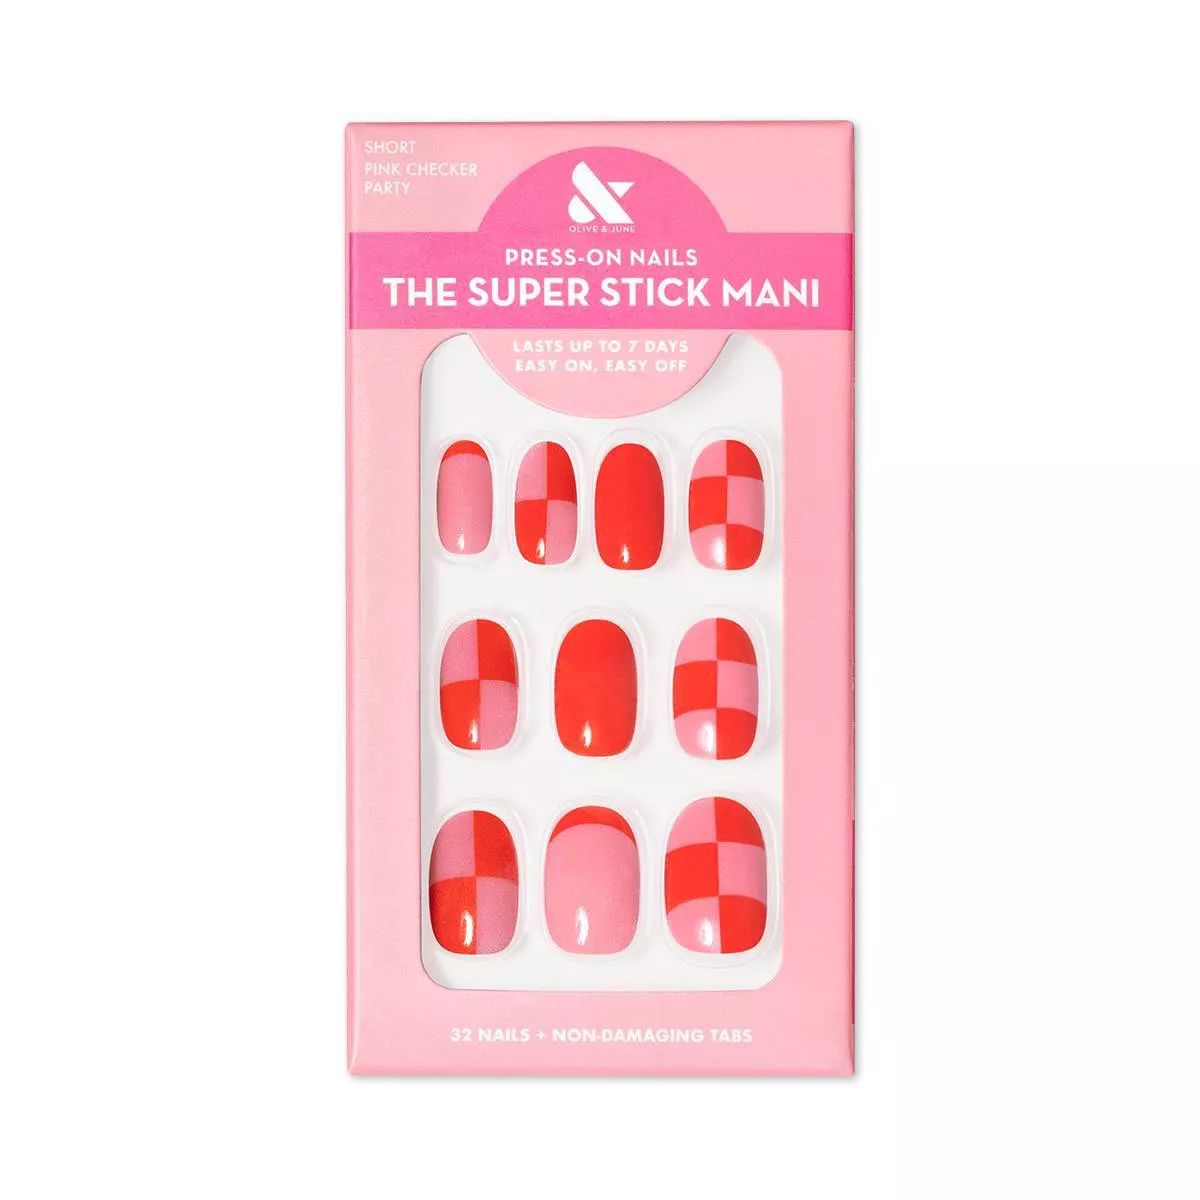 Olive & June Fake Nails - S Round - Pink Checker Party - 32ct | Target